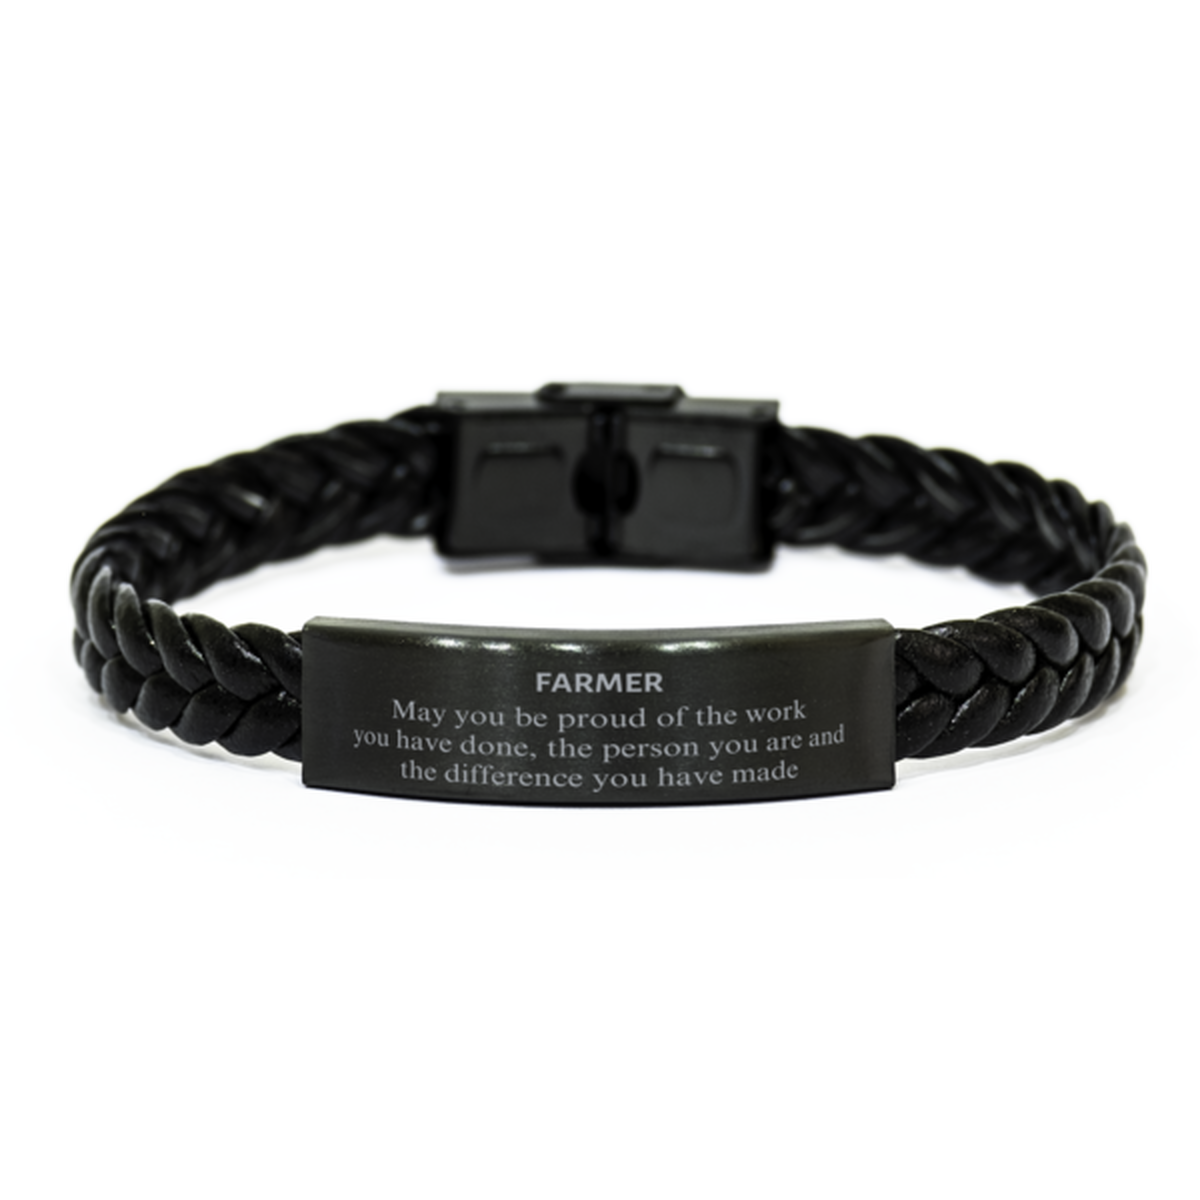 Farmer May you be proud of the work you have done, Retirement Farmer Braided Leather Bracelet for Colleague Appreciation Gifts Amazing for Farmer